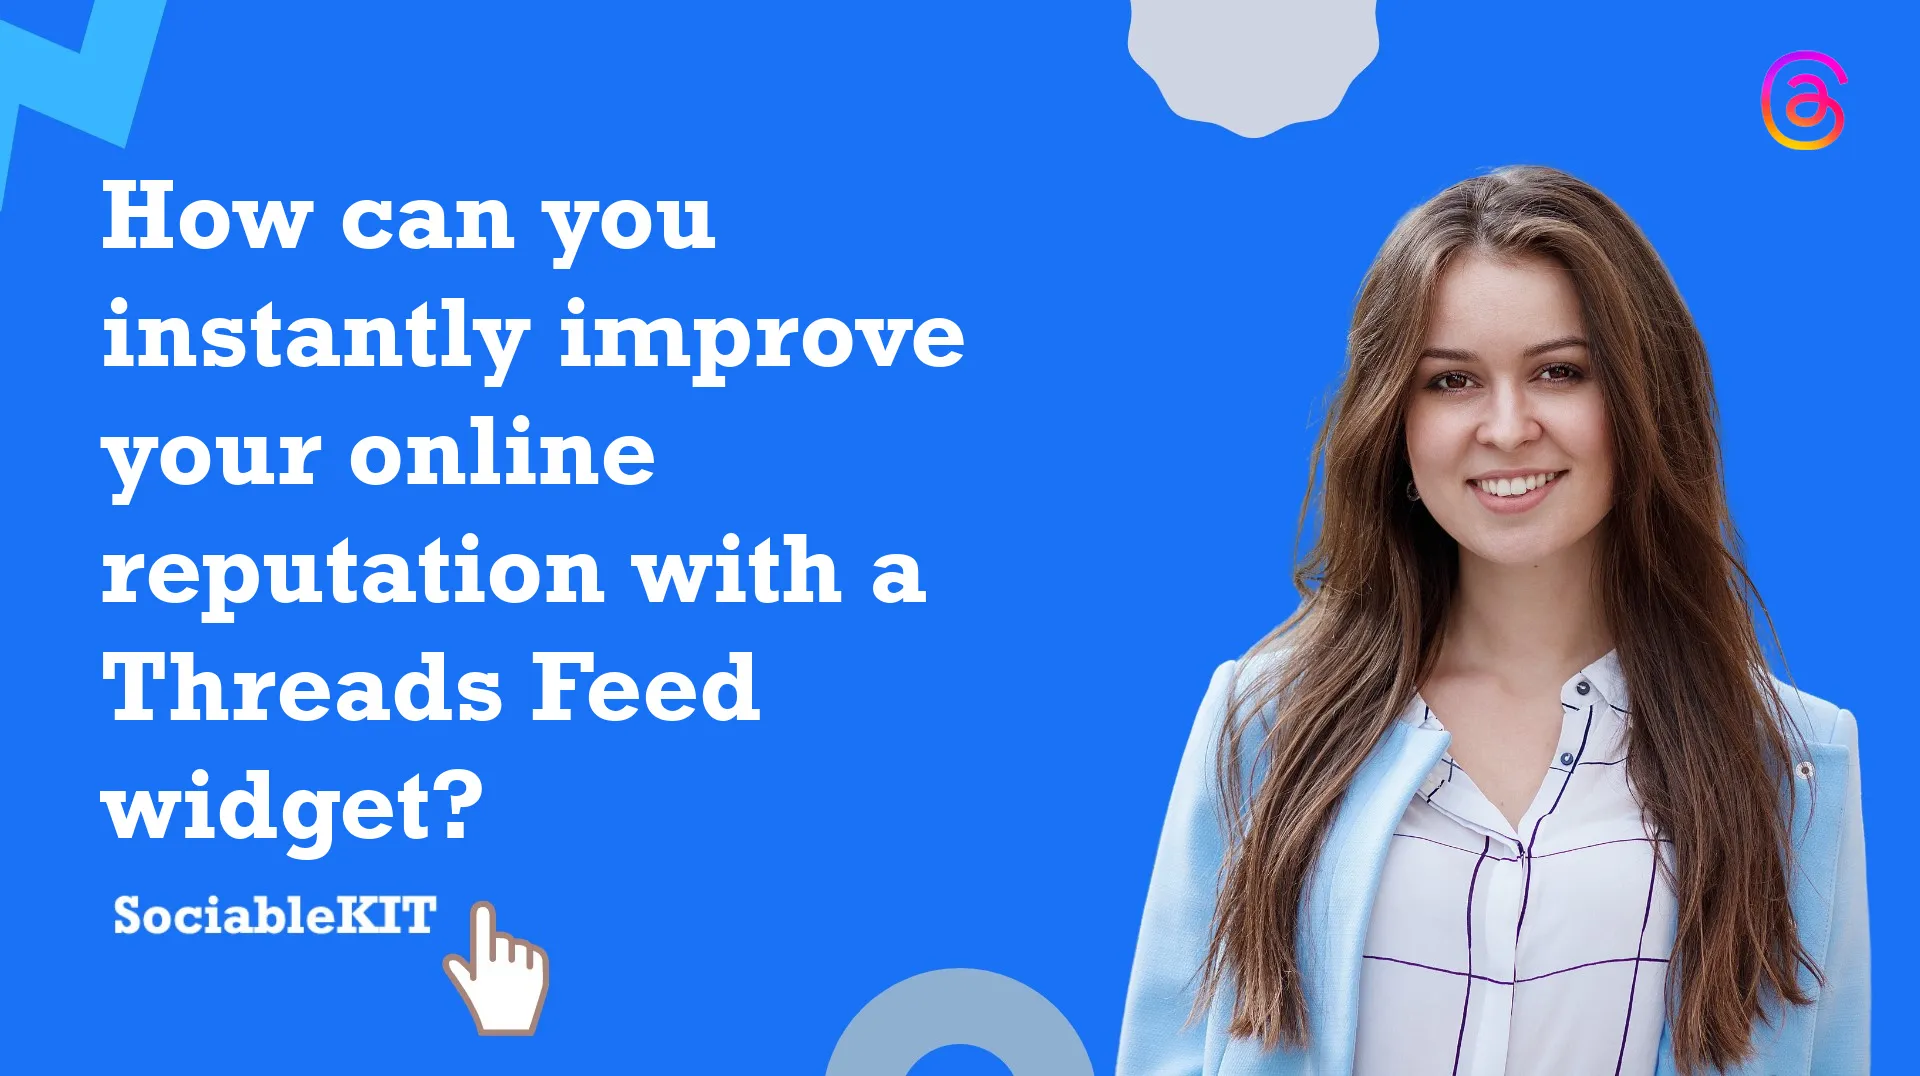 How can you instantly improve your online reputation with a Threads Feed widget?